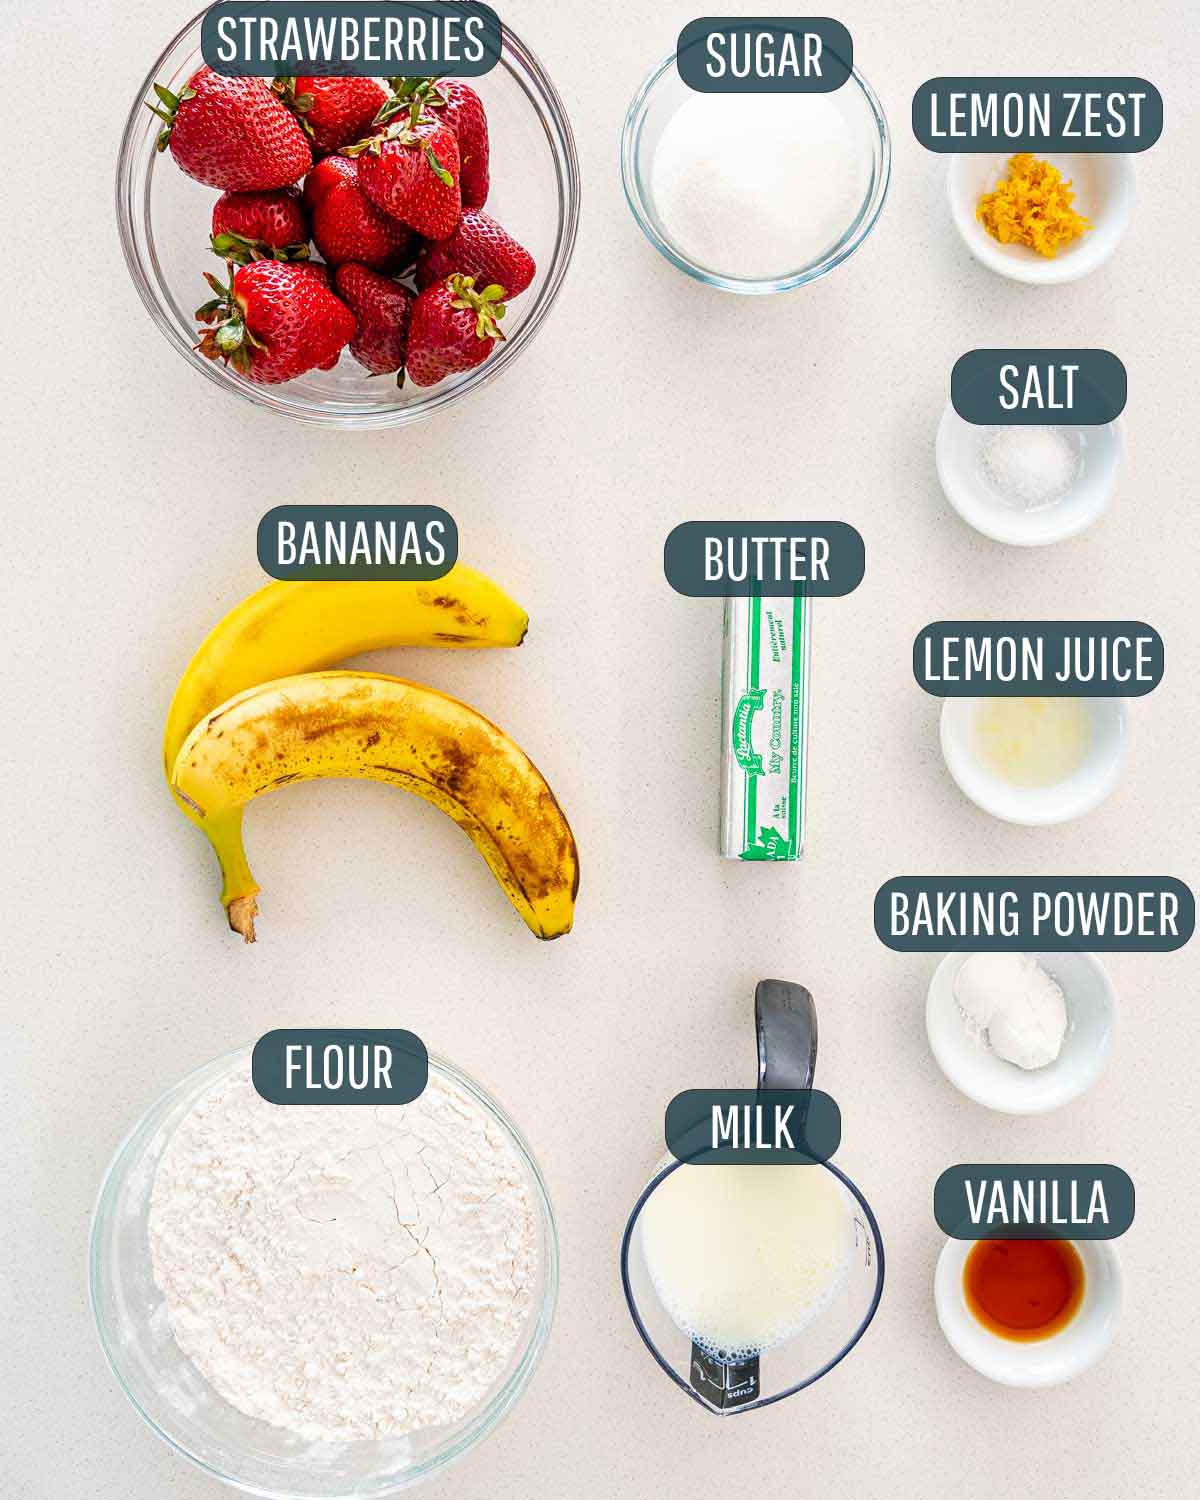 ingredients needed to make strawberry banana cookies.